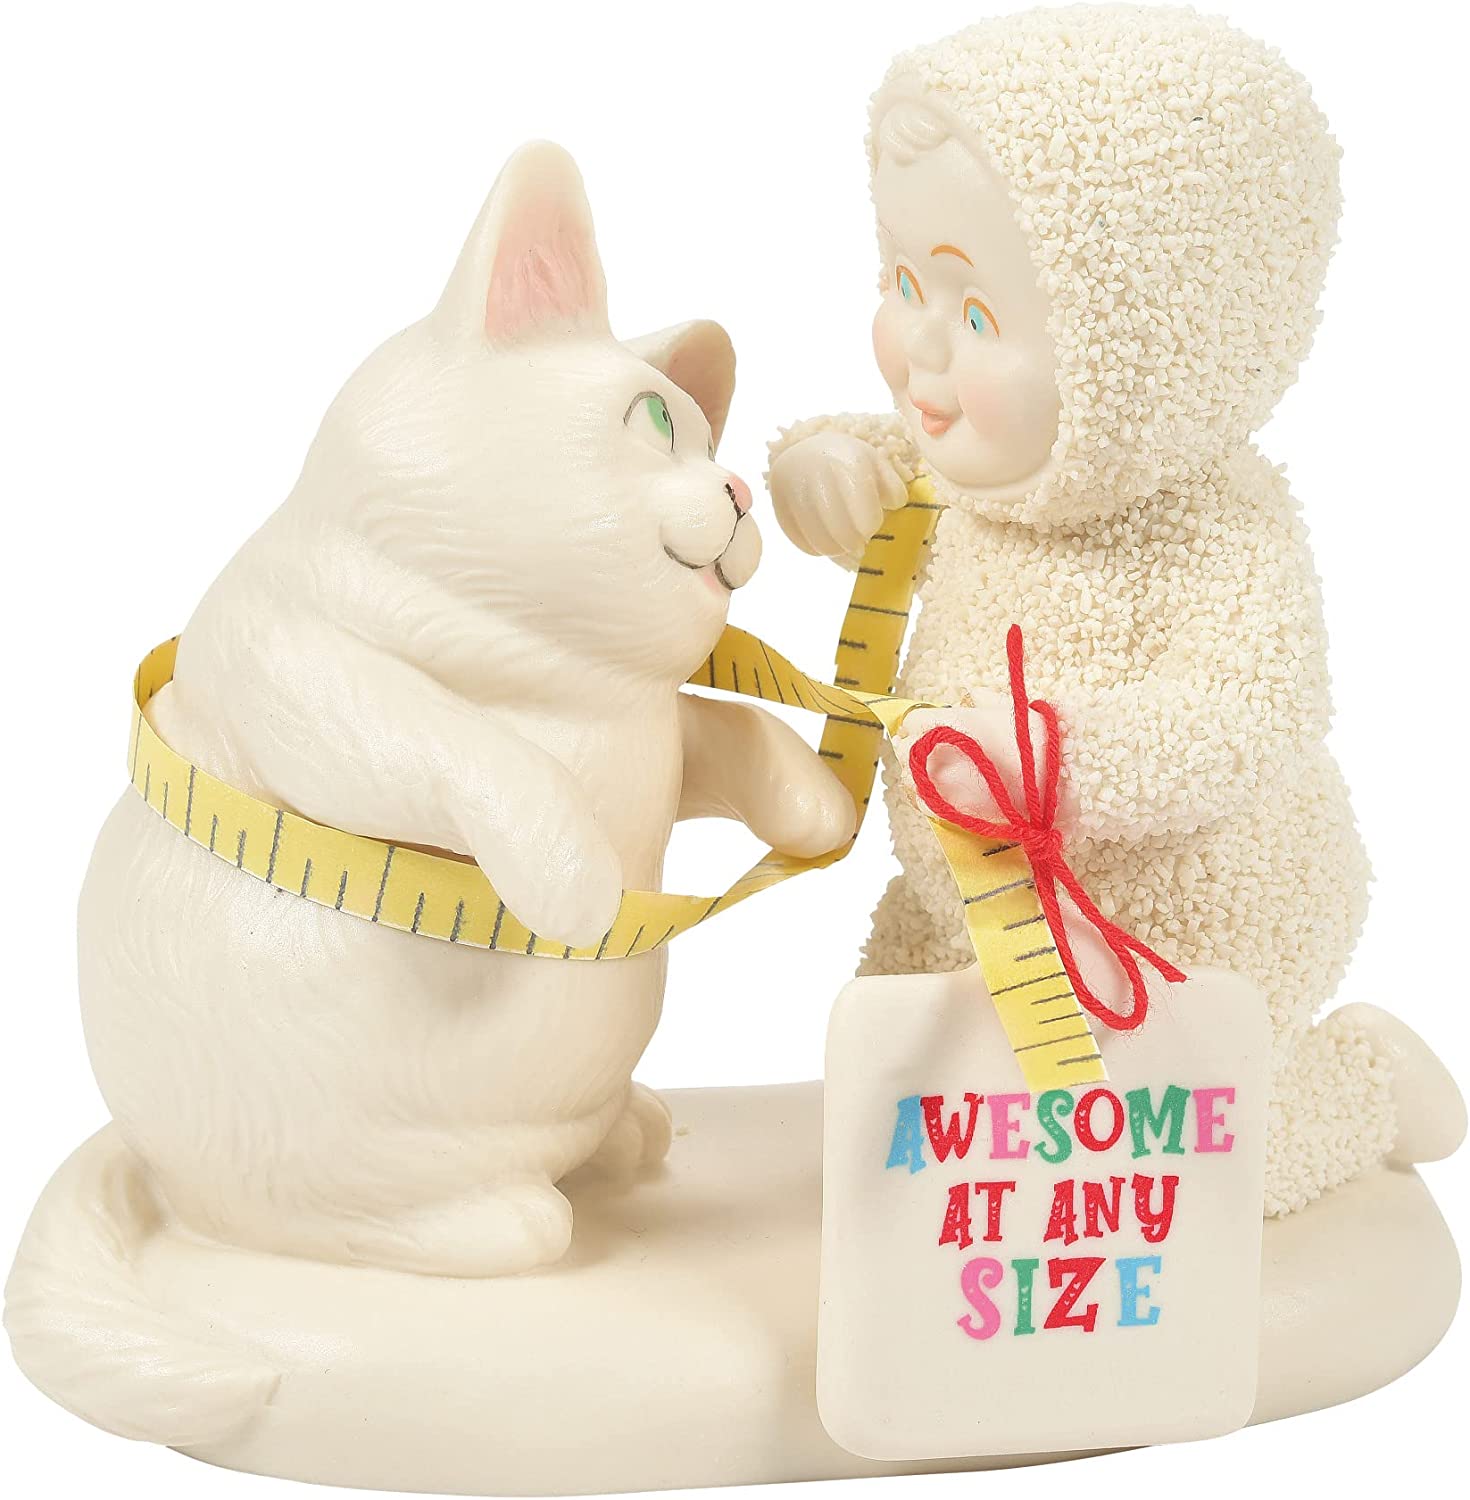 Department 56 Snowbabies Awesome at Any Size Figurine